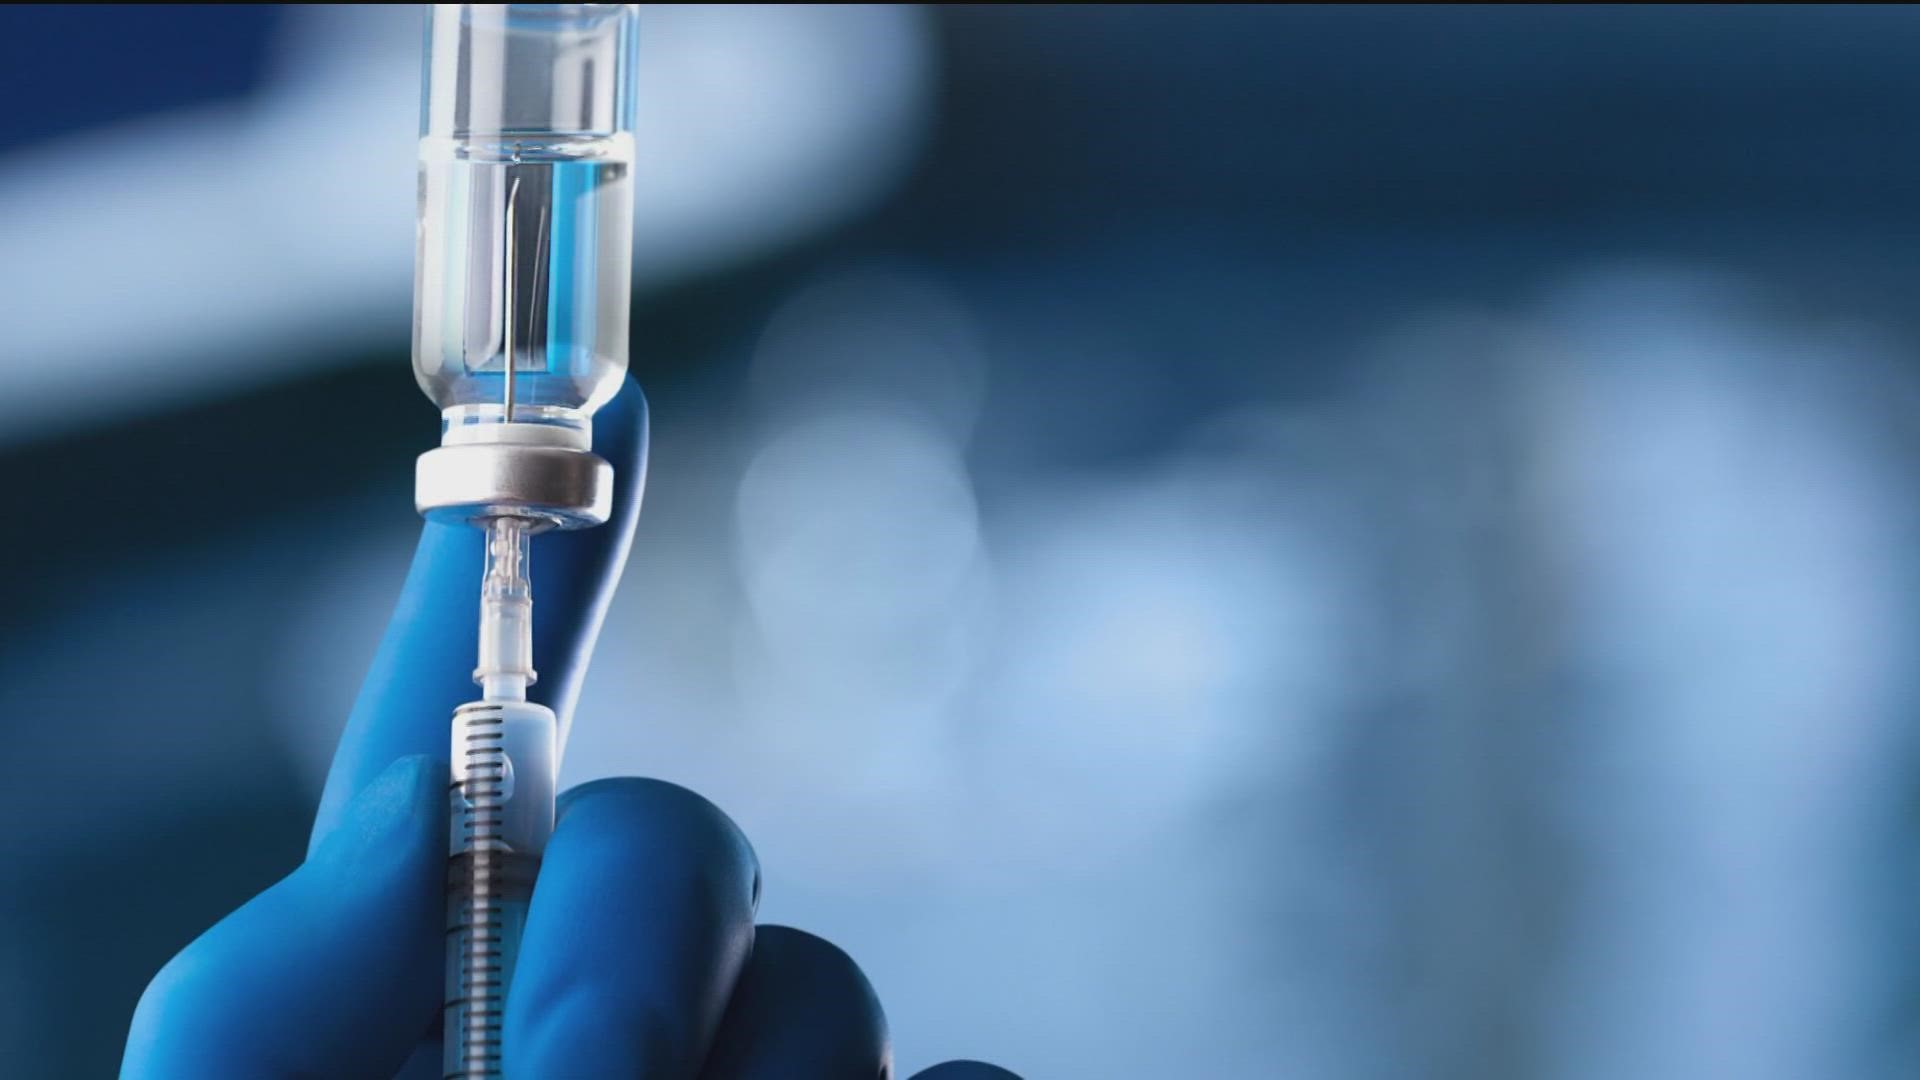 COVID cases are seeing an uptick across the country, while the rates of vaccine administration have stalled. Experts say this may lead to hospitalizations & deaths.